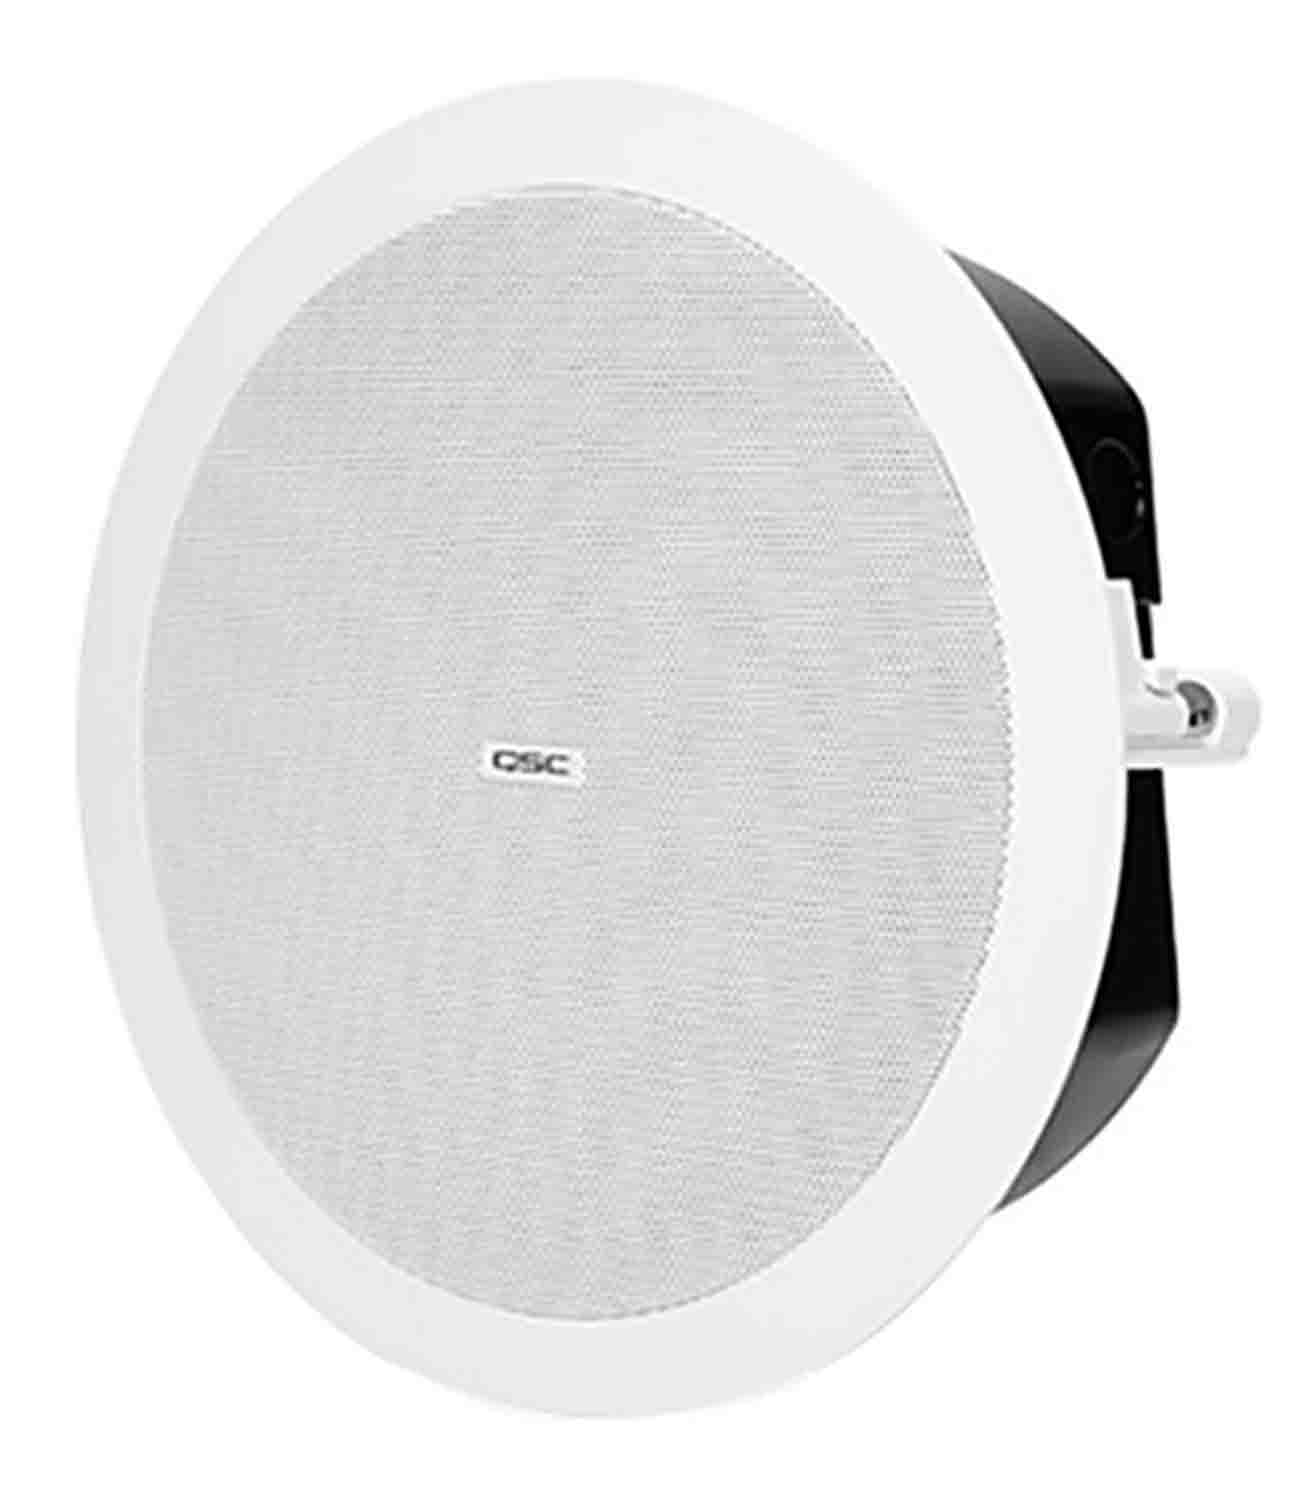 QSC AD-C4T-LP 4.5-Inch 2-Way, Low-Profile Ceiling Loudspeaker - White - Hollywood DJ